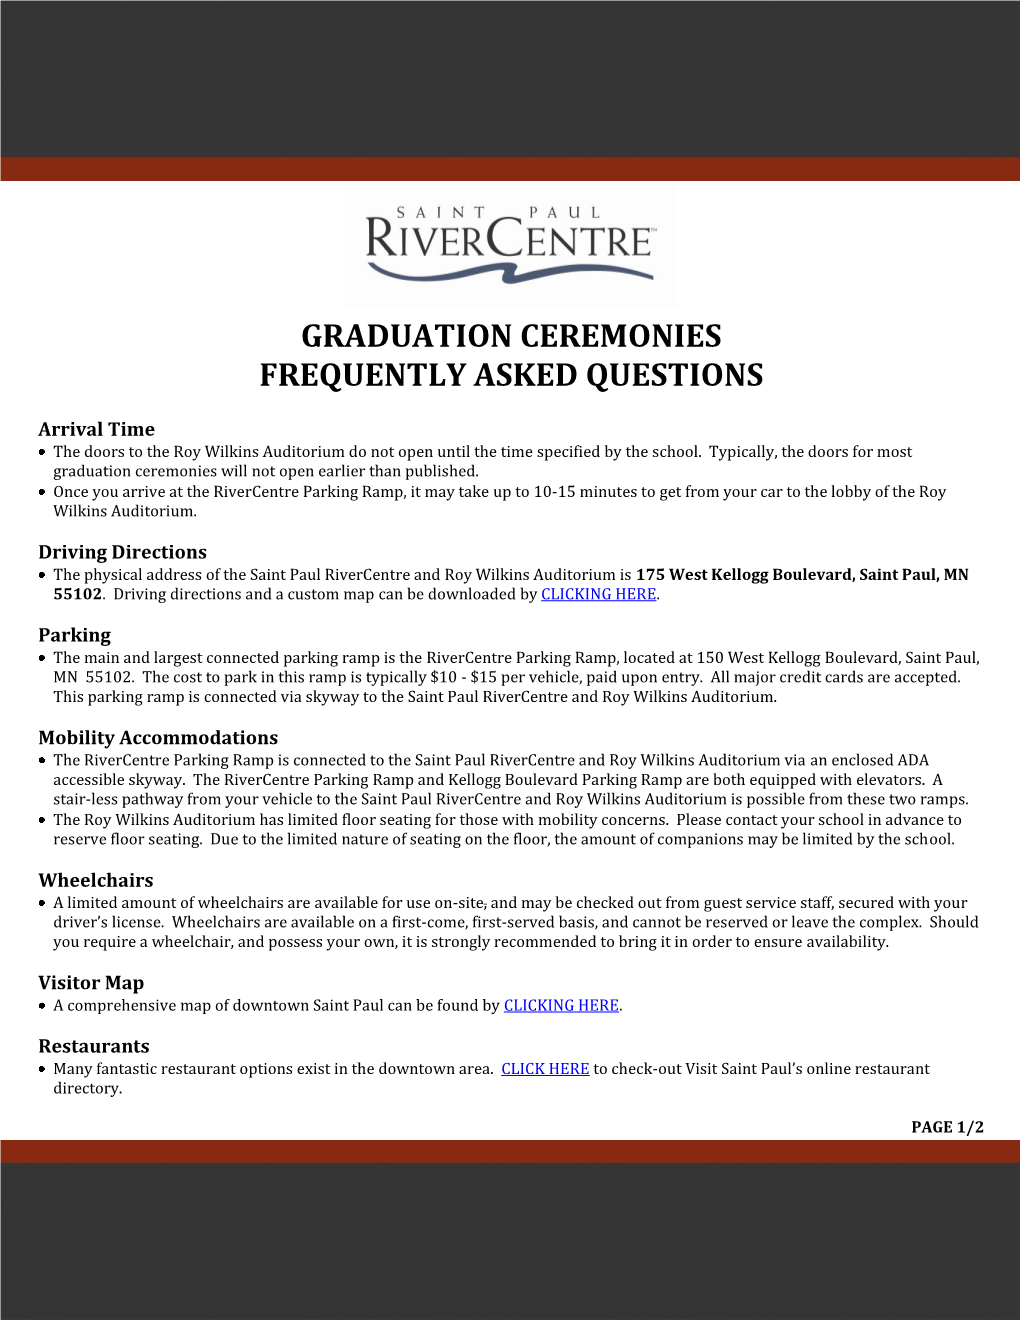 Graduation Ceremonies Frequently Asked Questions